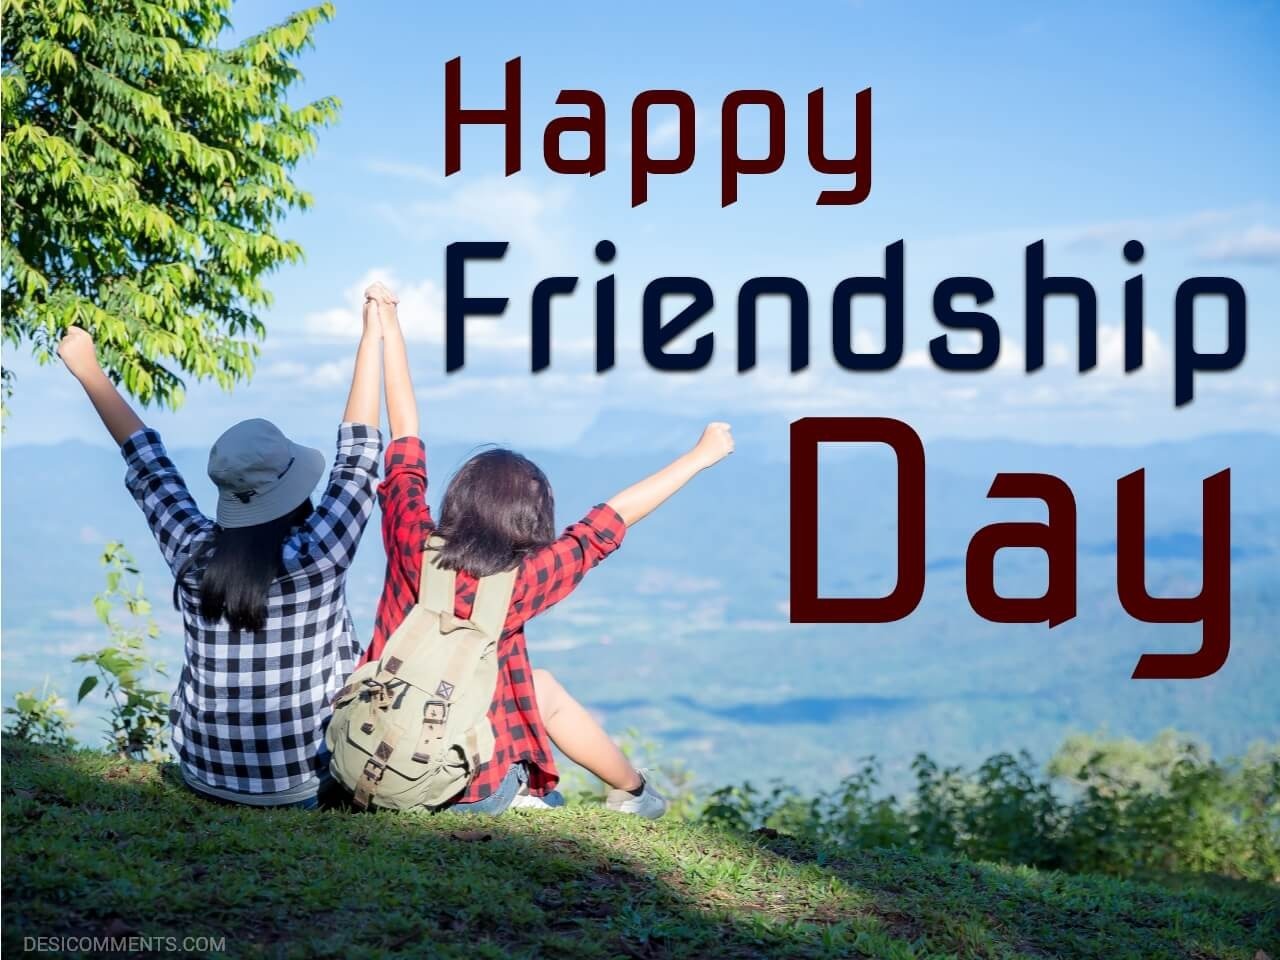 Download Top 999+ Friendship Day Images – Incredible Collection of Friendship Day Images in Full 4K